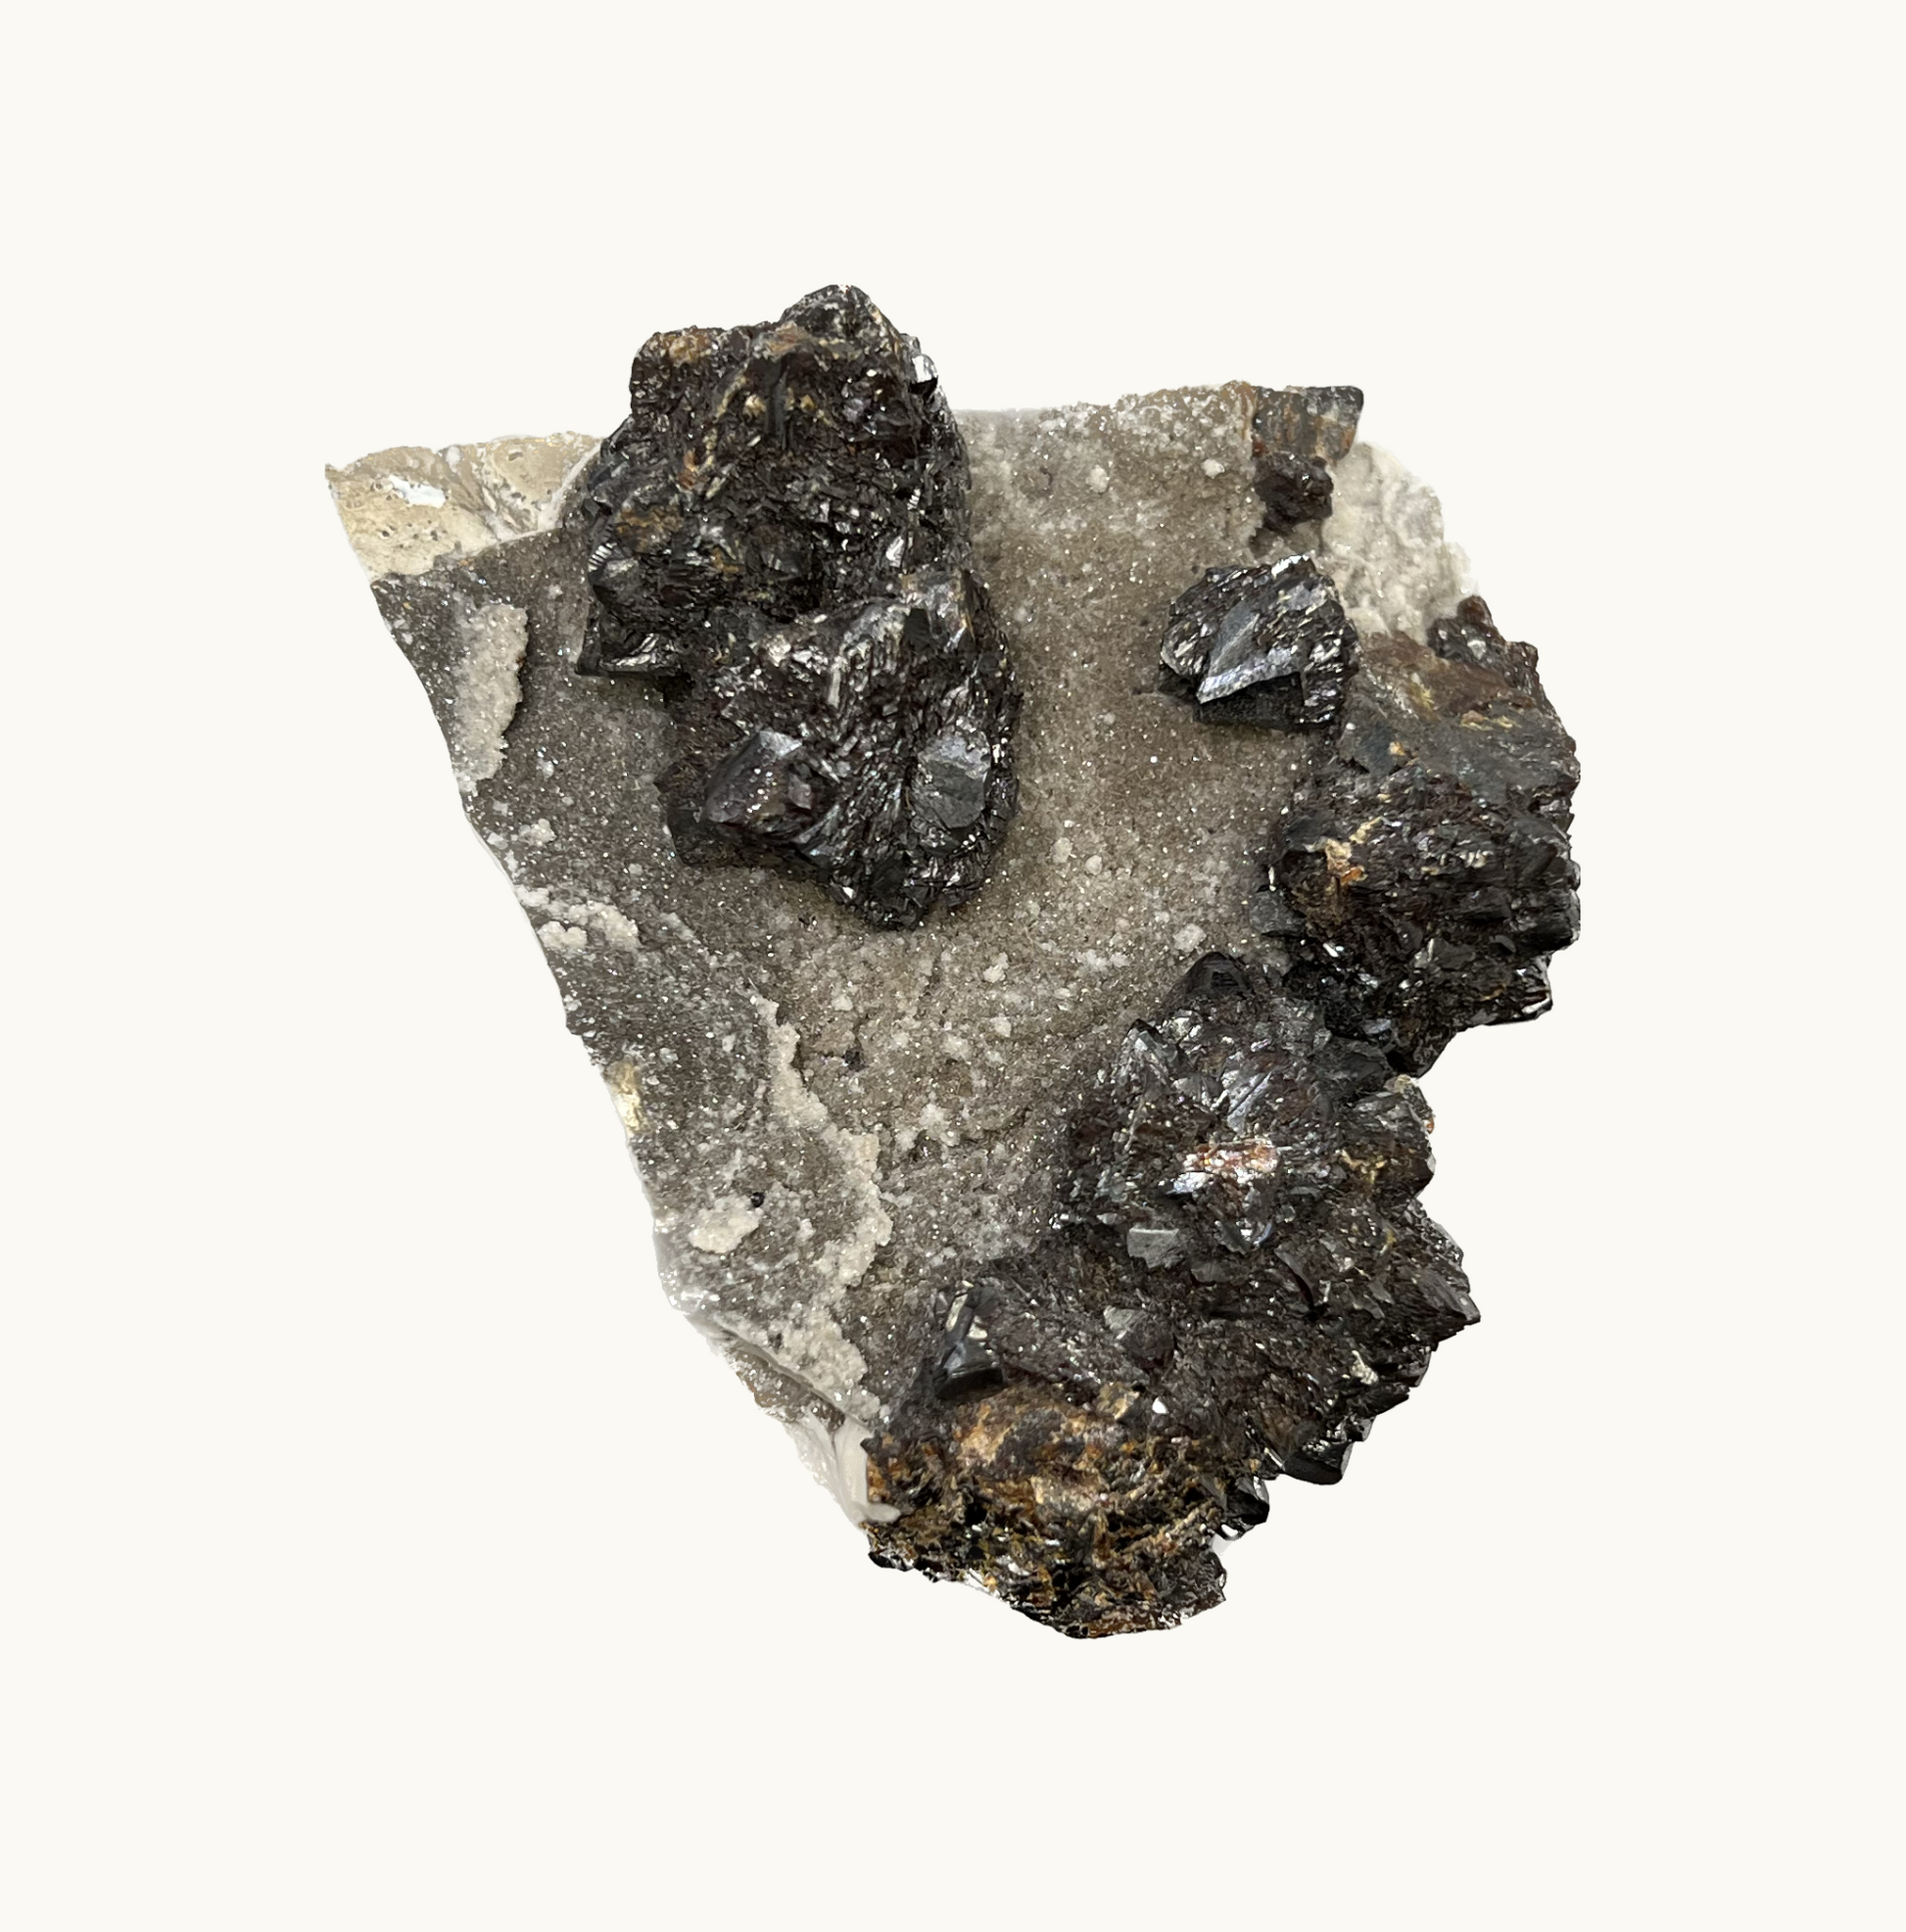 Sphalerite crystal measuring approximately 4” x 3.25” x 1.75”, perfect for enhancing psychic abilities and creativity.